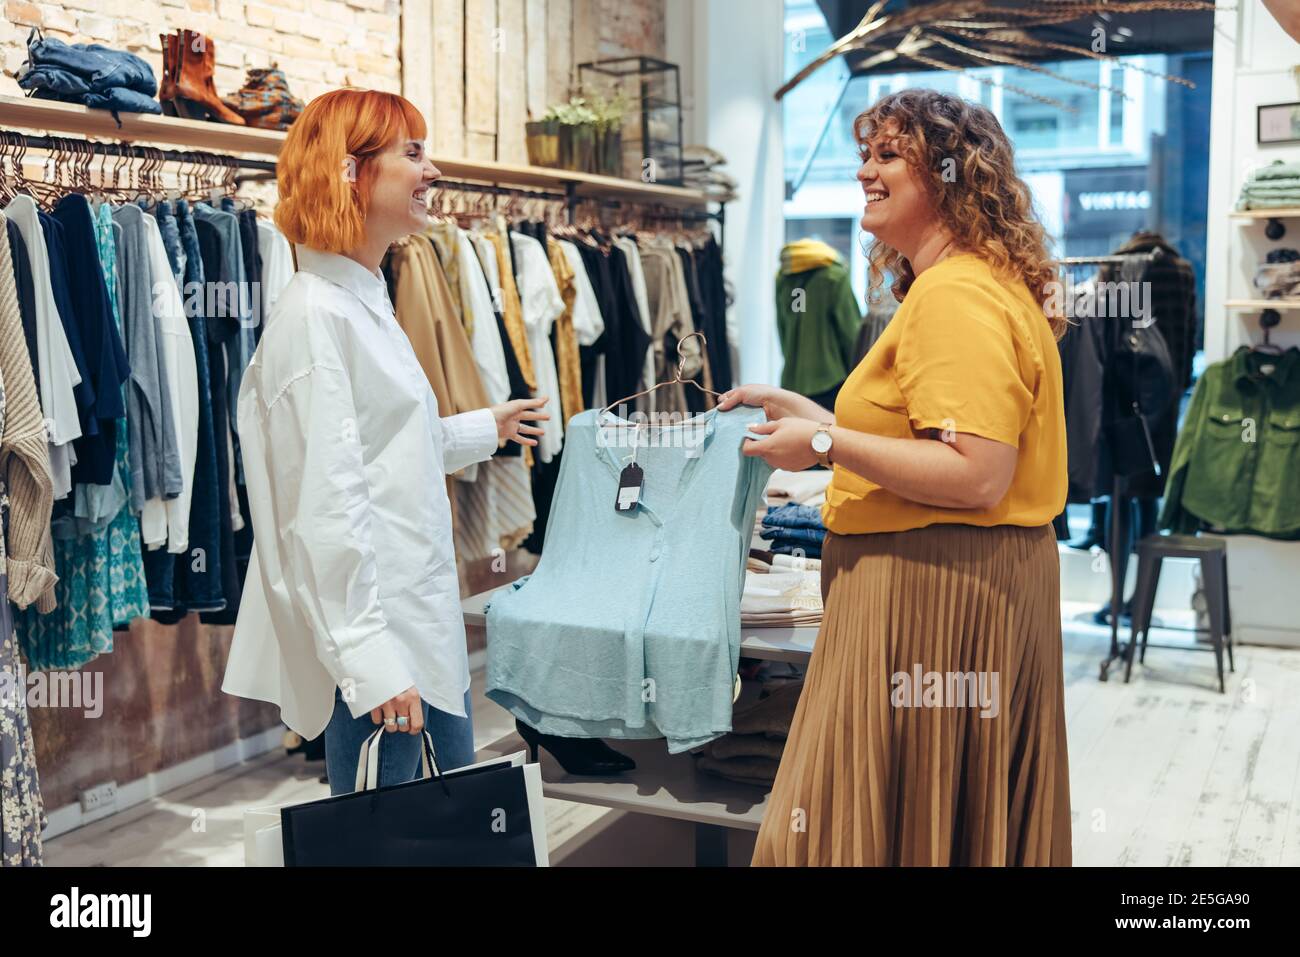 Fashion store owner holding a top and showing it to a female customer. Woman working in a fashion shop assisting shopper. Stock Photo